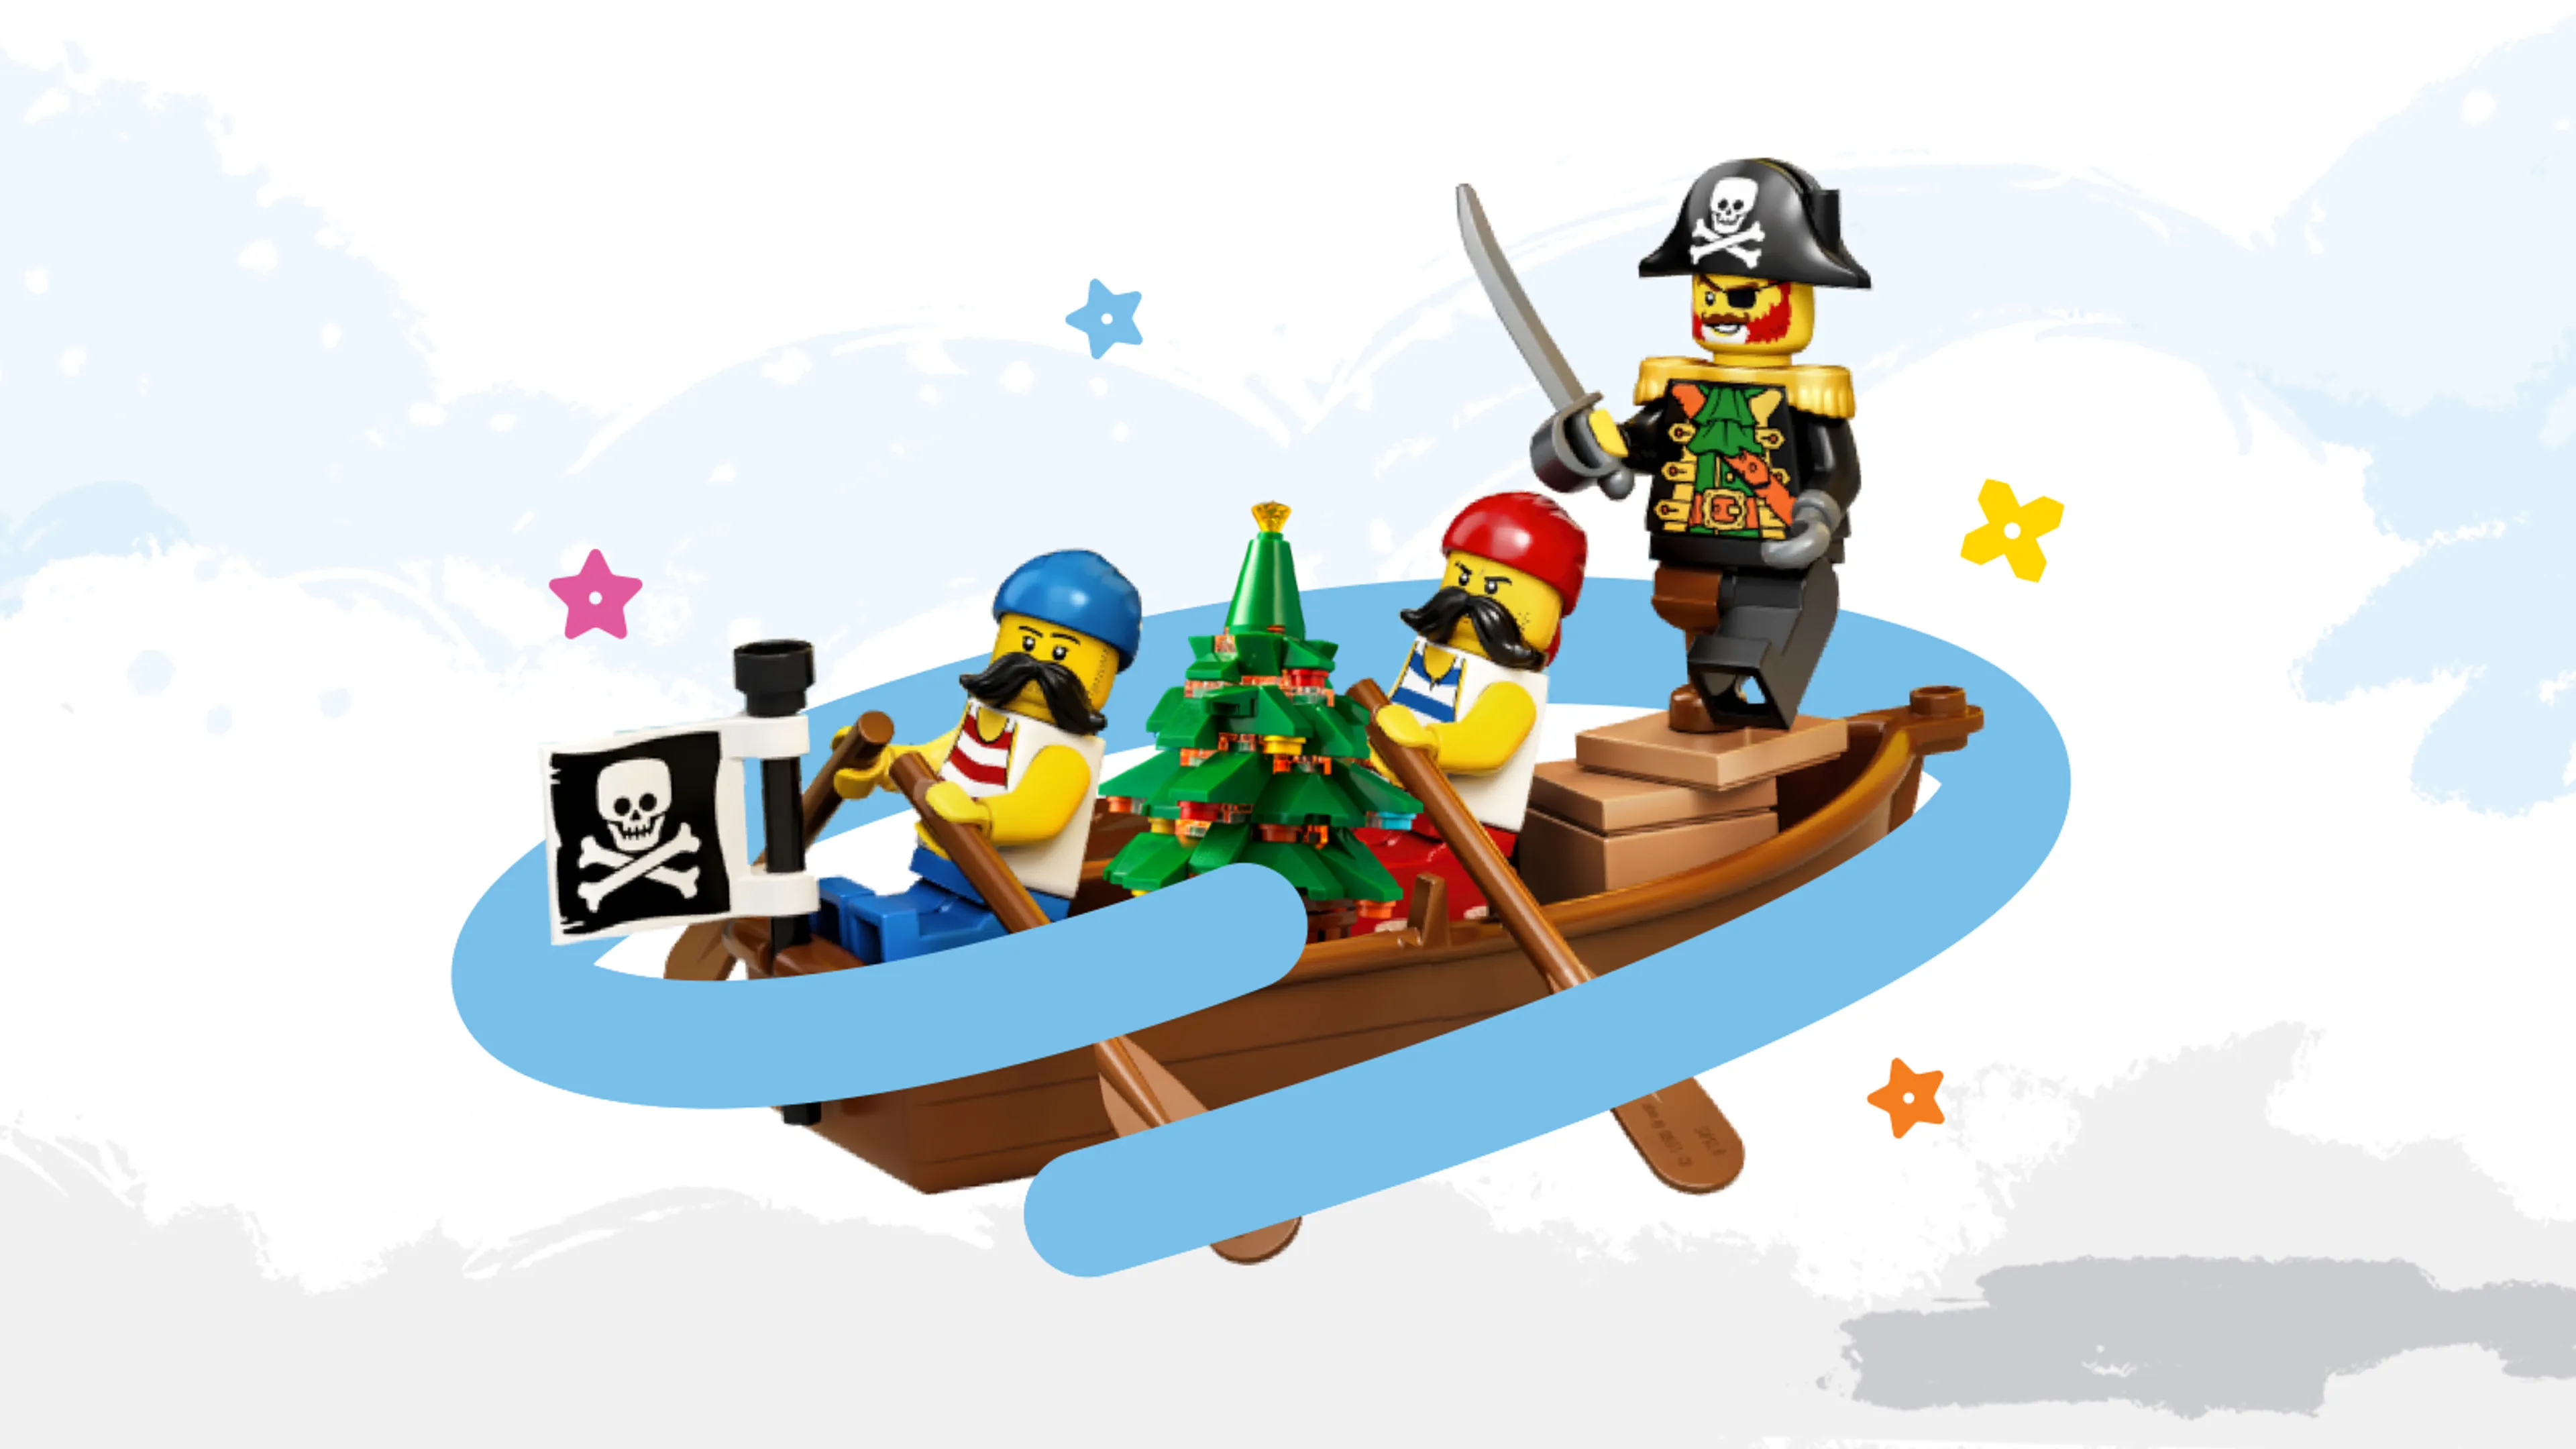 Minifigure pirates in a boat with a holiday tree